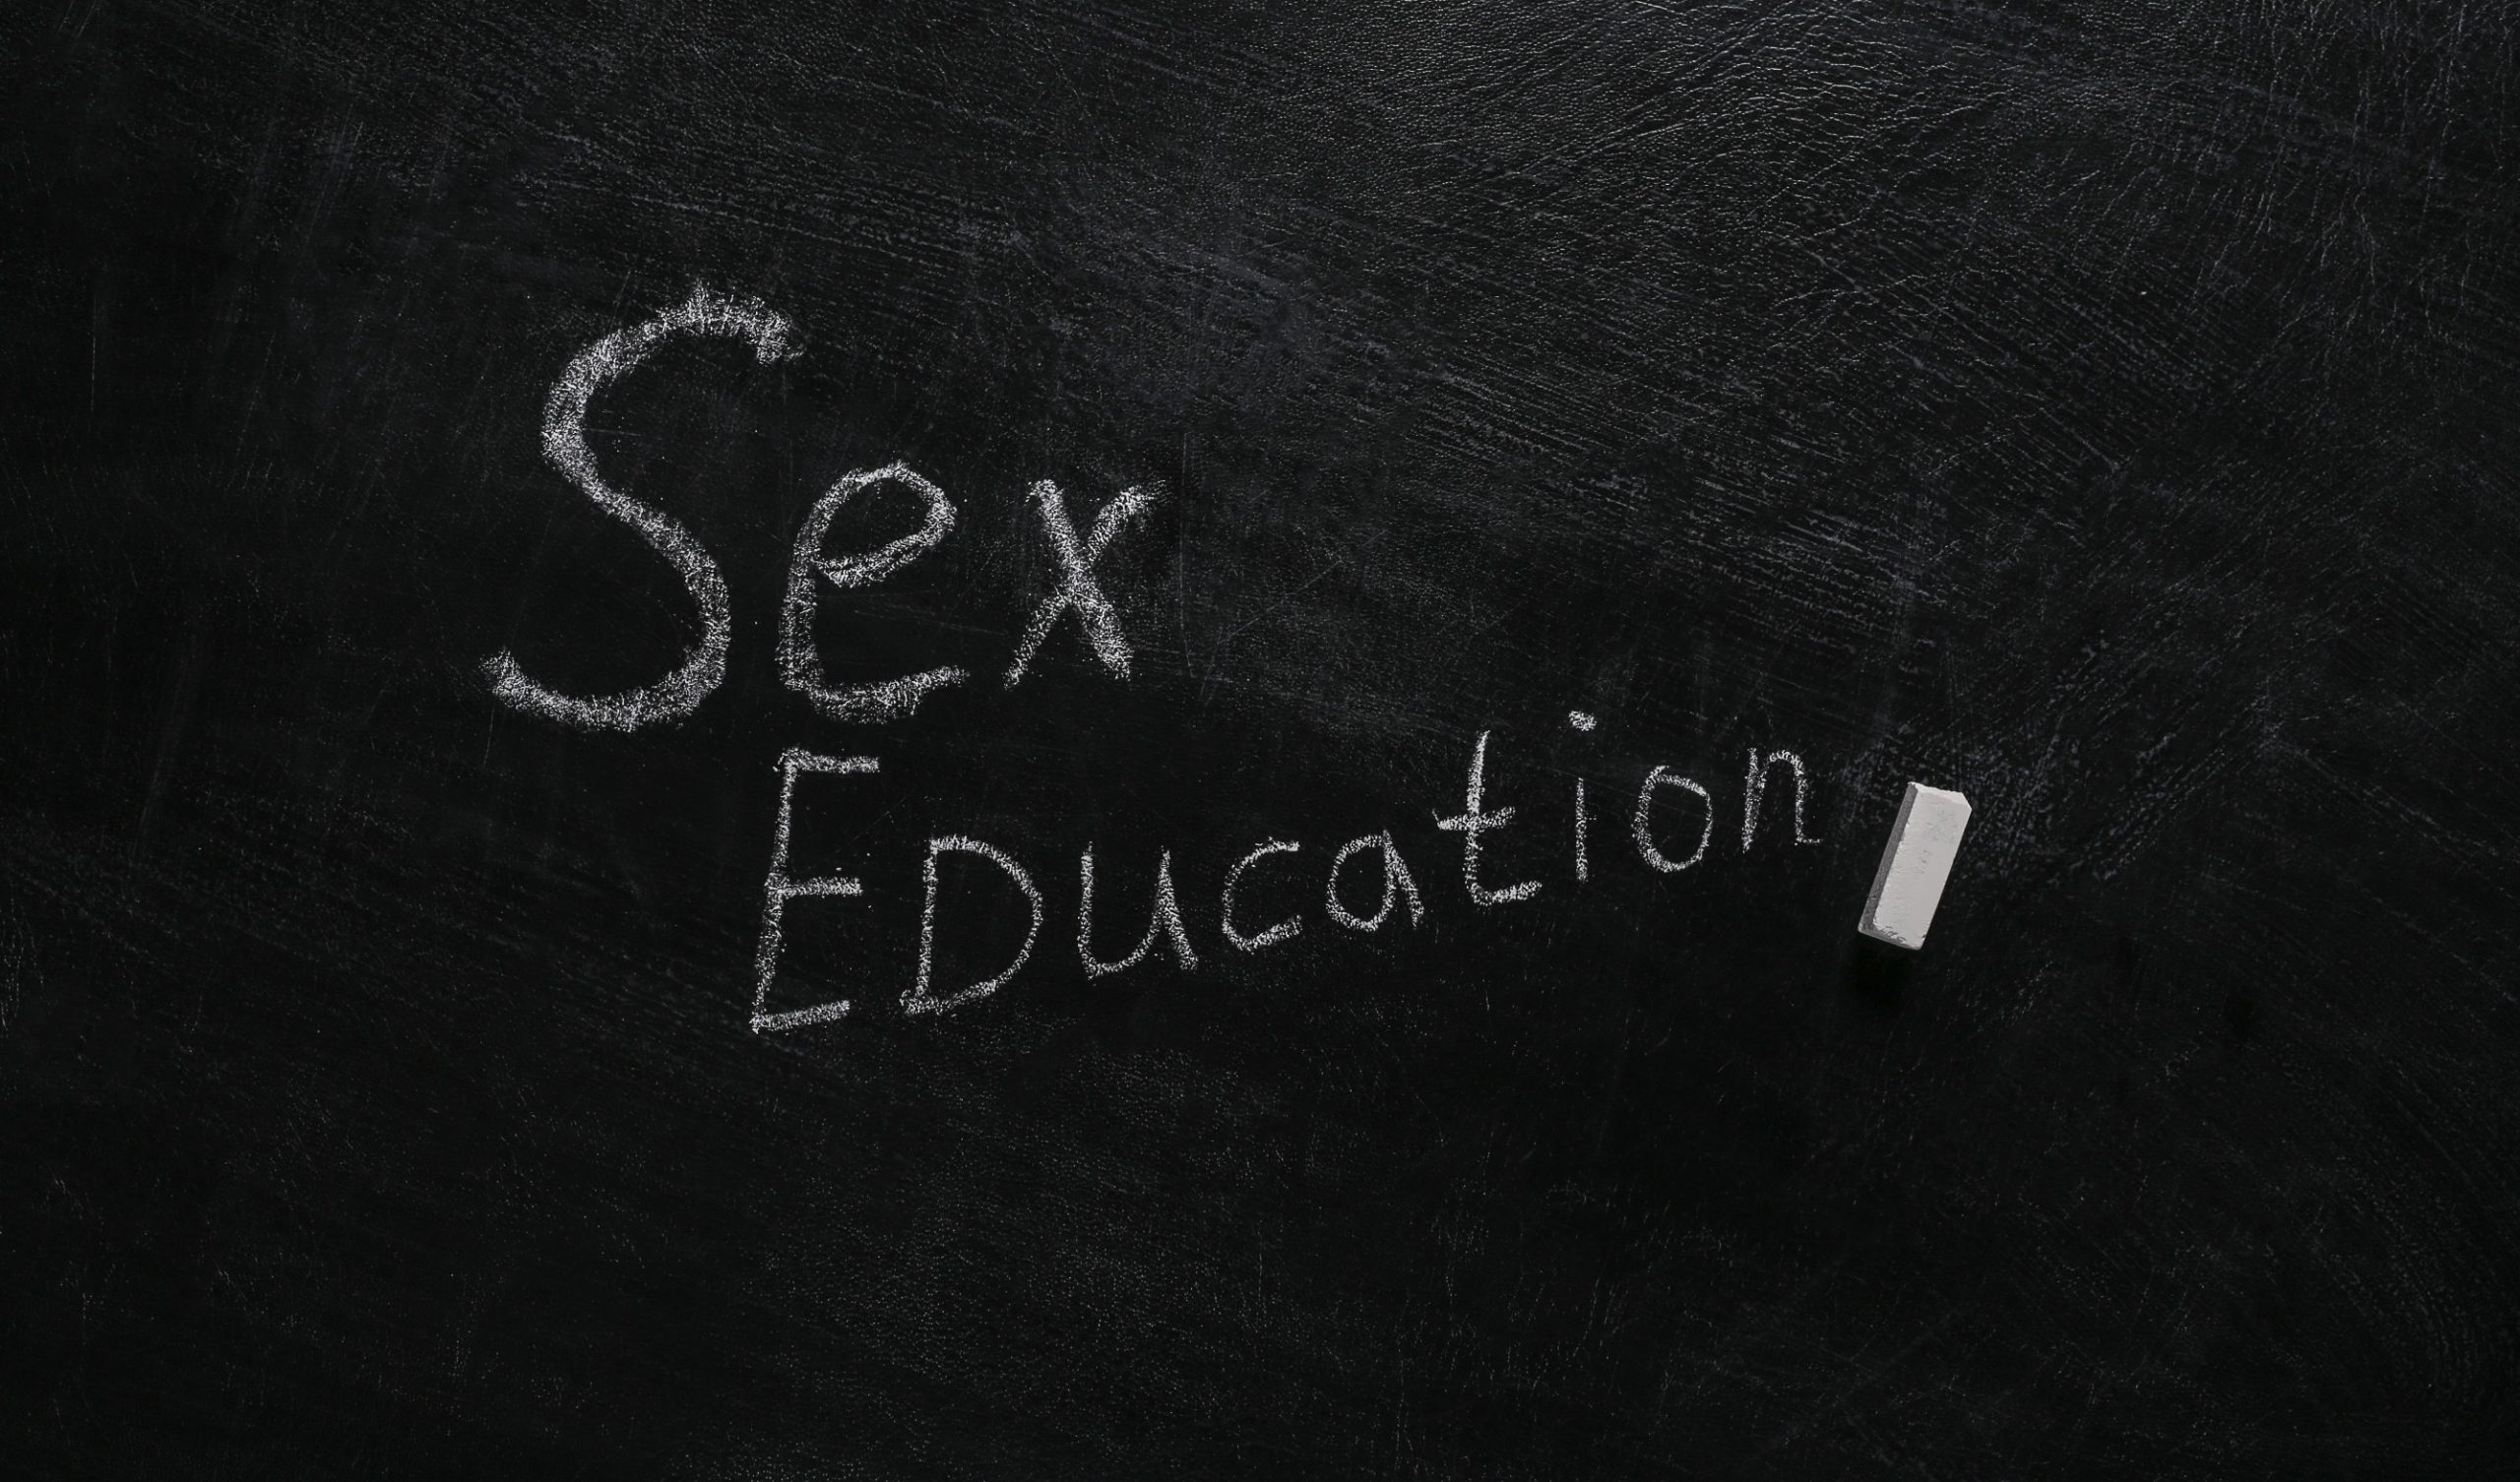 Sex education for incarcerated